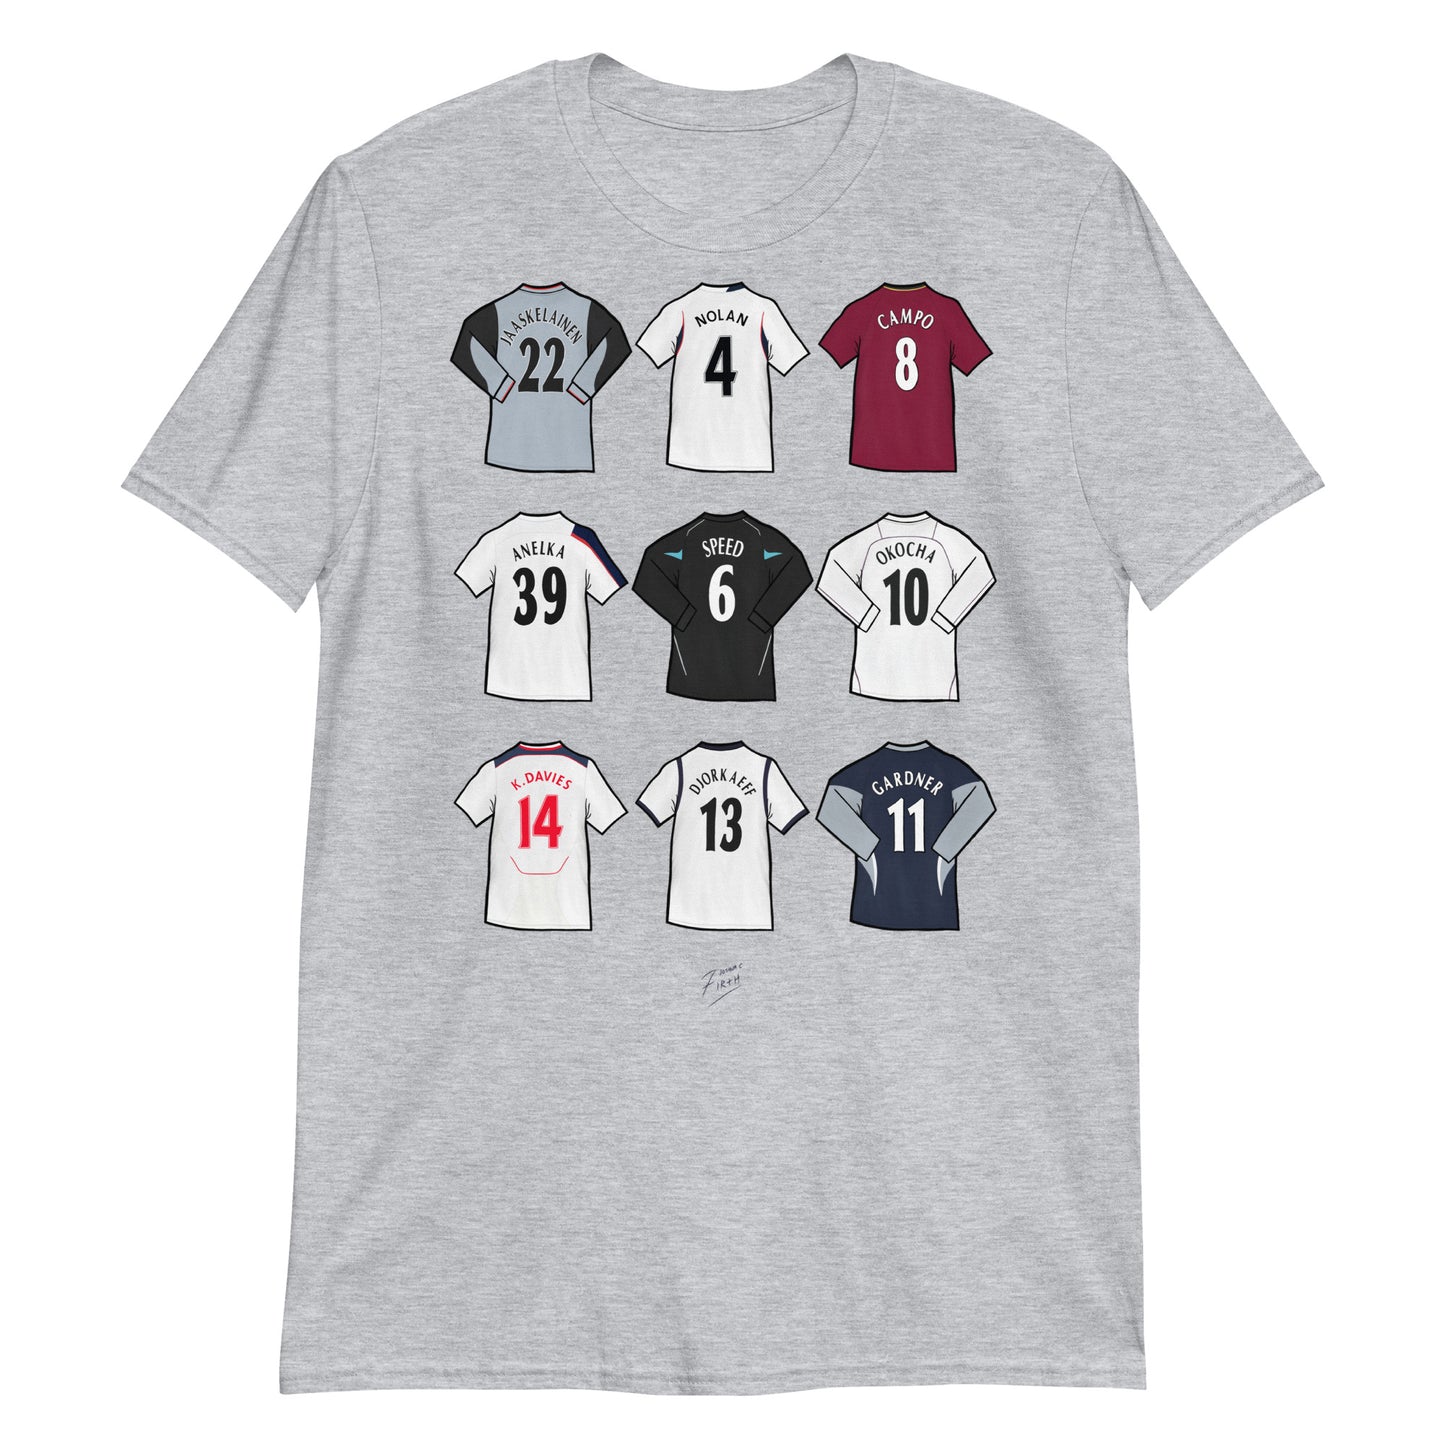 Bolton Legends Shirts Illustrated Football Themed T-Shirt